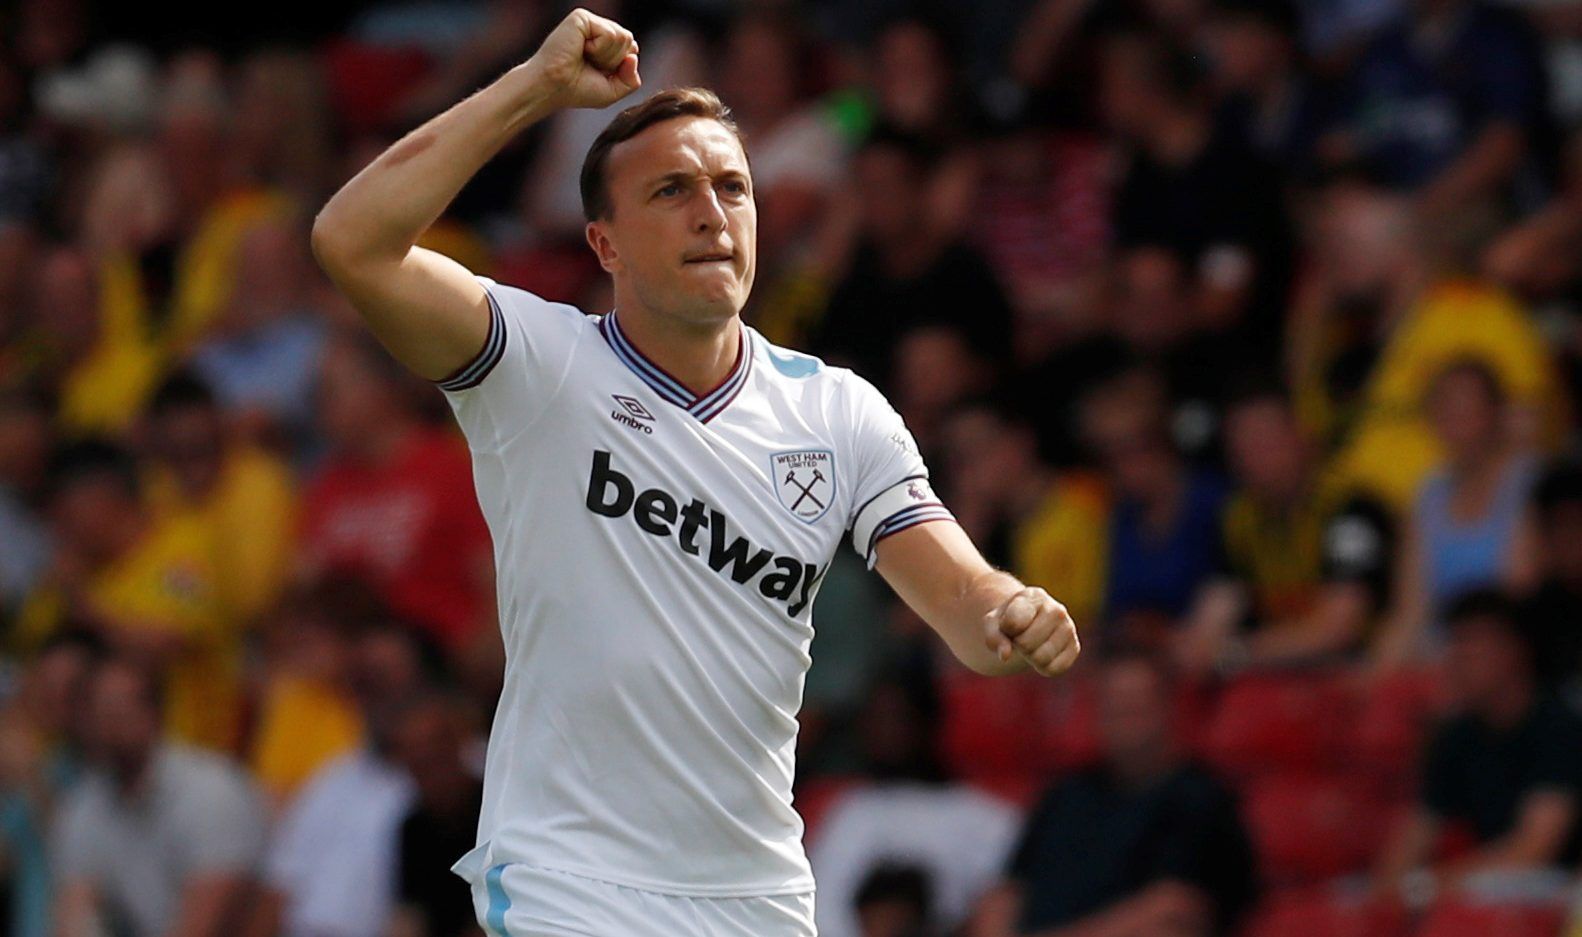 Soccer Football - Premier League - Watford v West Ham United - Vicarage Road, Watford, Britain - August 24, 2019  West Ham United's Mark Noble celebrates scoring their first goal      REUTERS/Russell Cheyne  EDITORIAL USE ONLY. No use with unauthorized audio, video, data, fixture lists, club/league logos or 